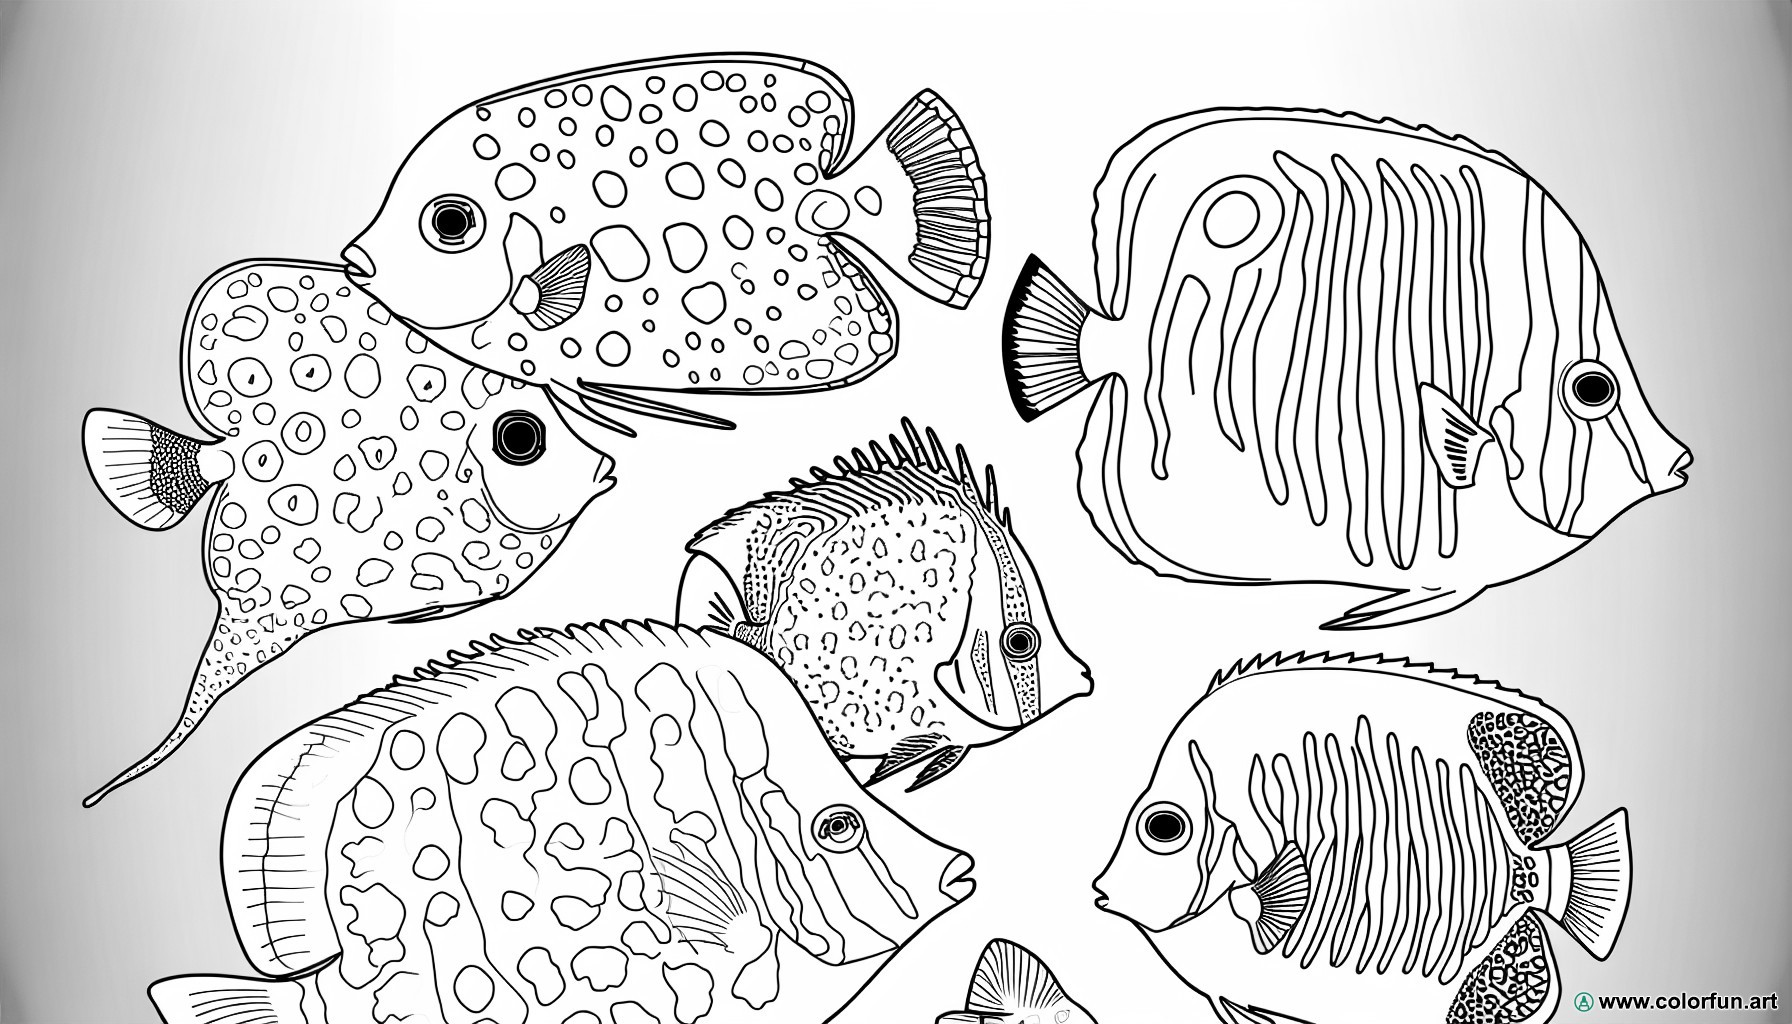 1 tropical fish coloring page